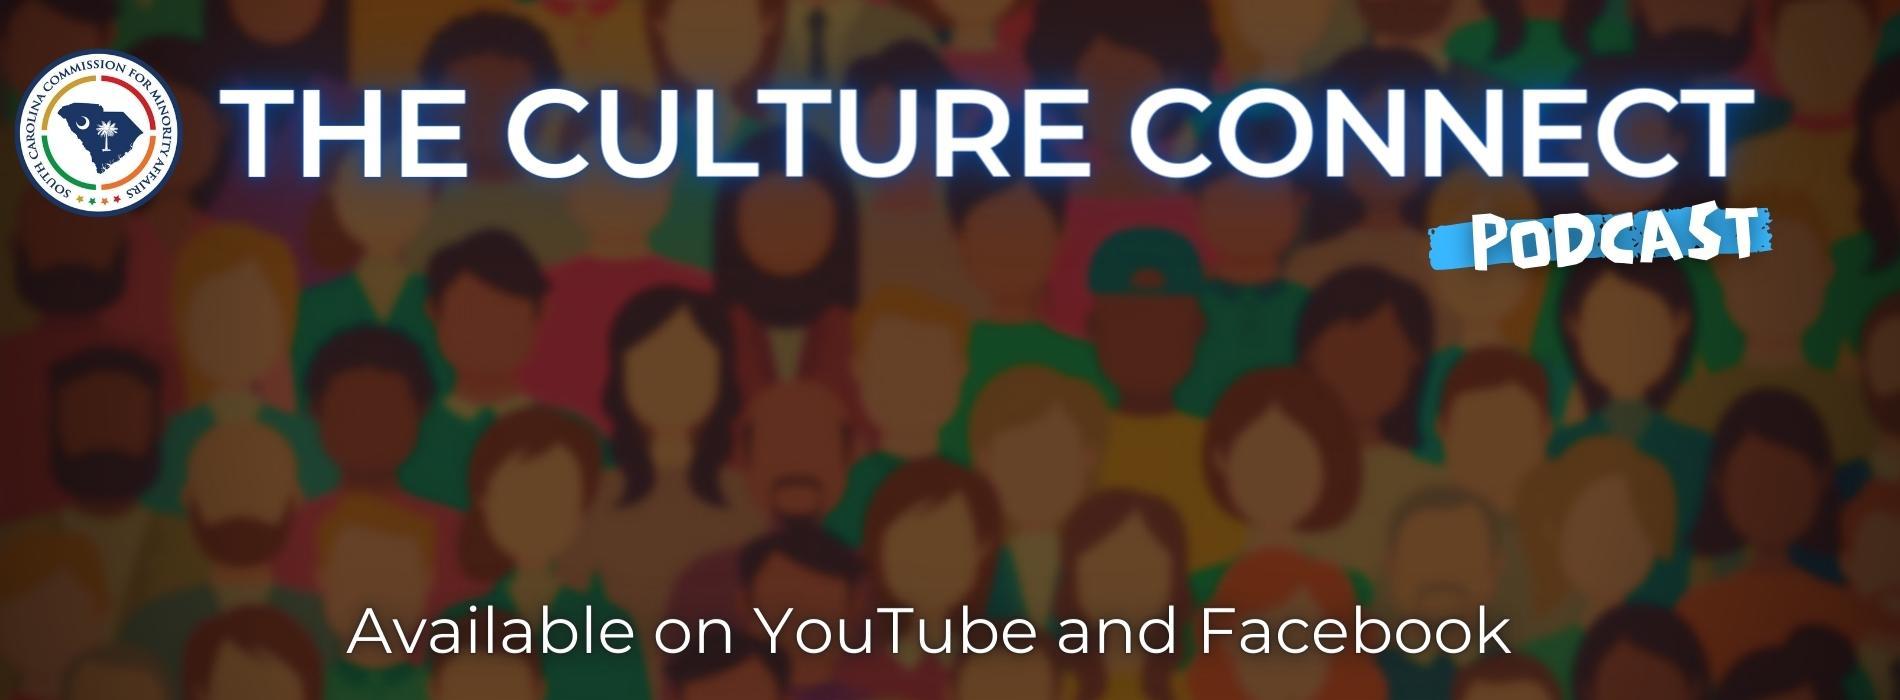 The Culture Connect Podcast Slider